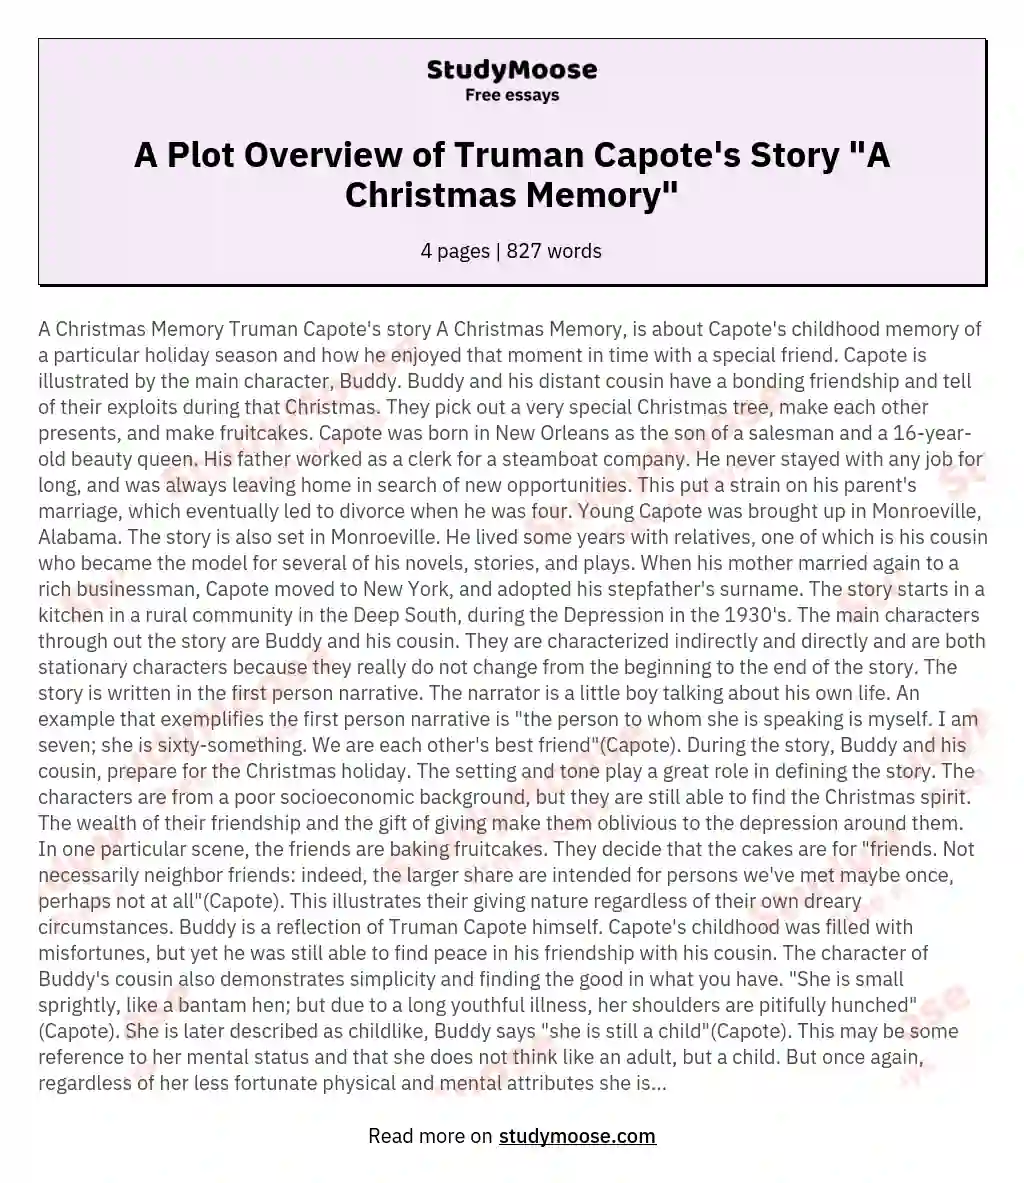 A Plot Overview of Truman Capote's Story "A Christmas Memory" essay